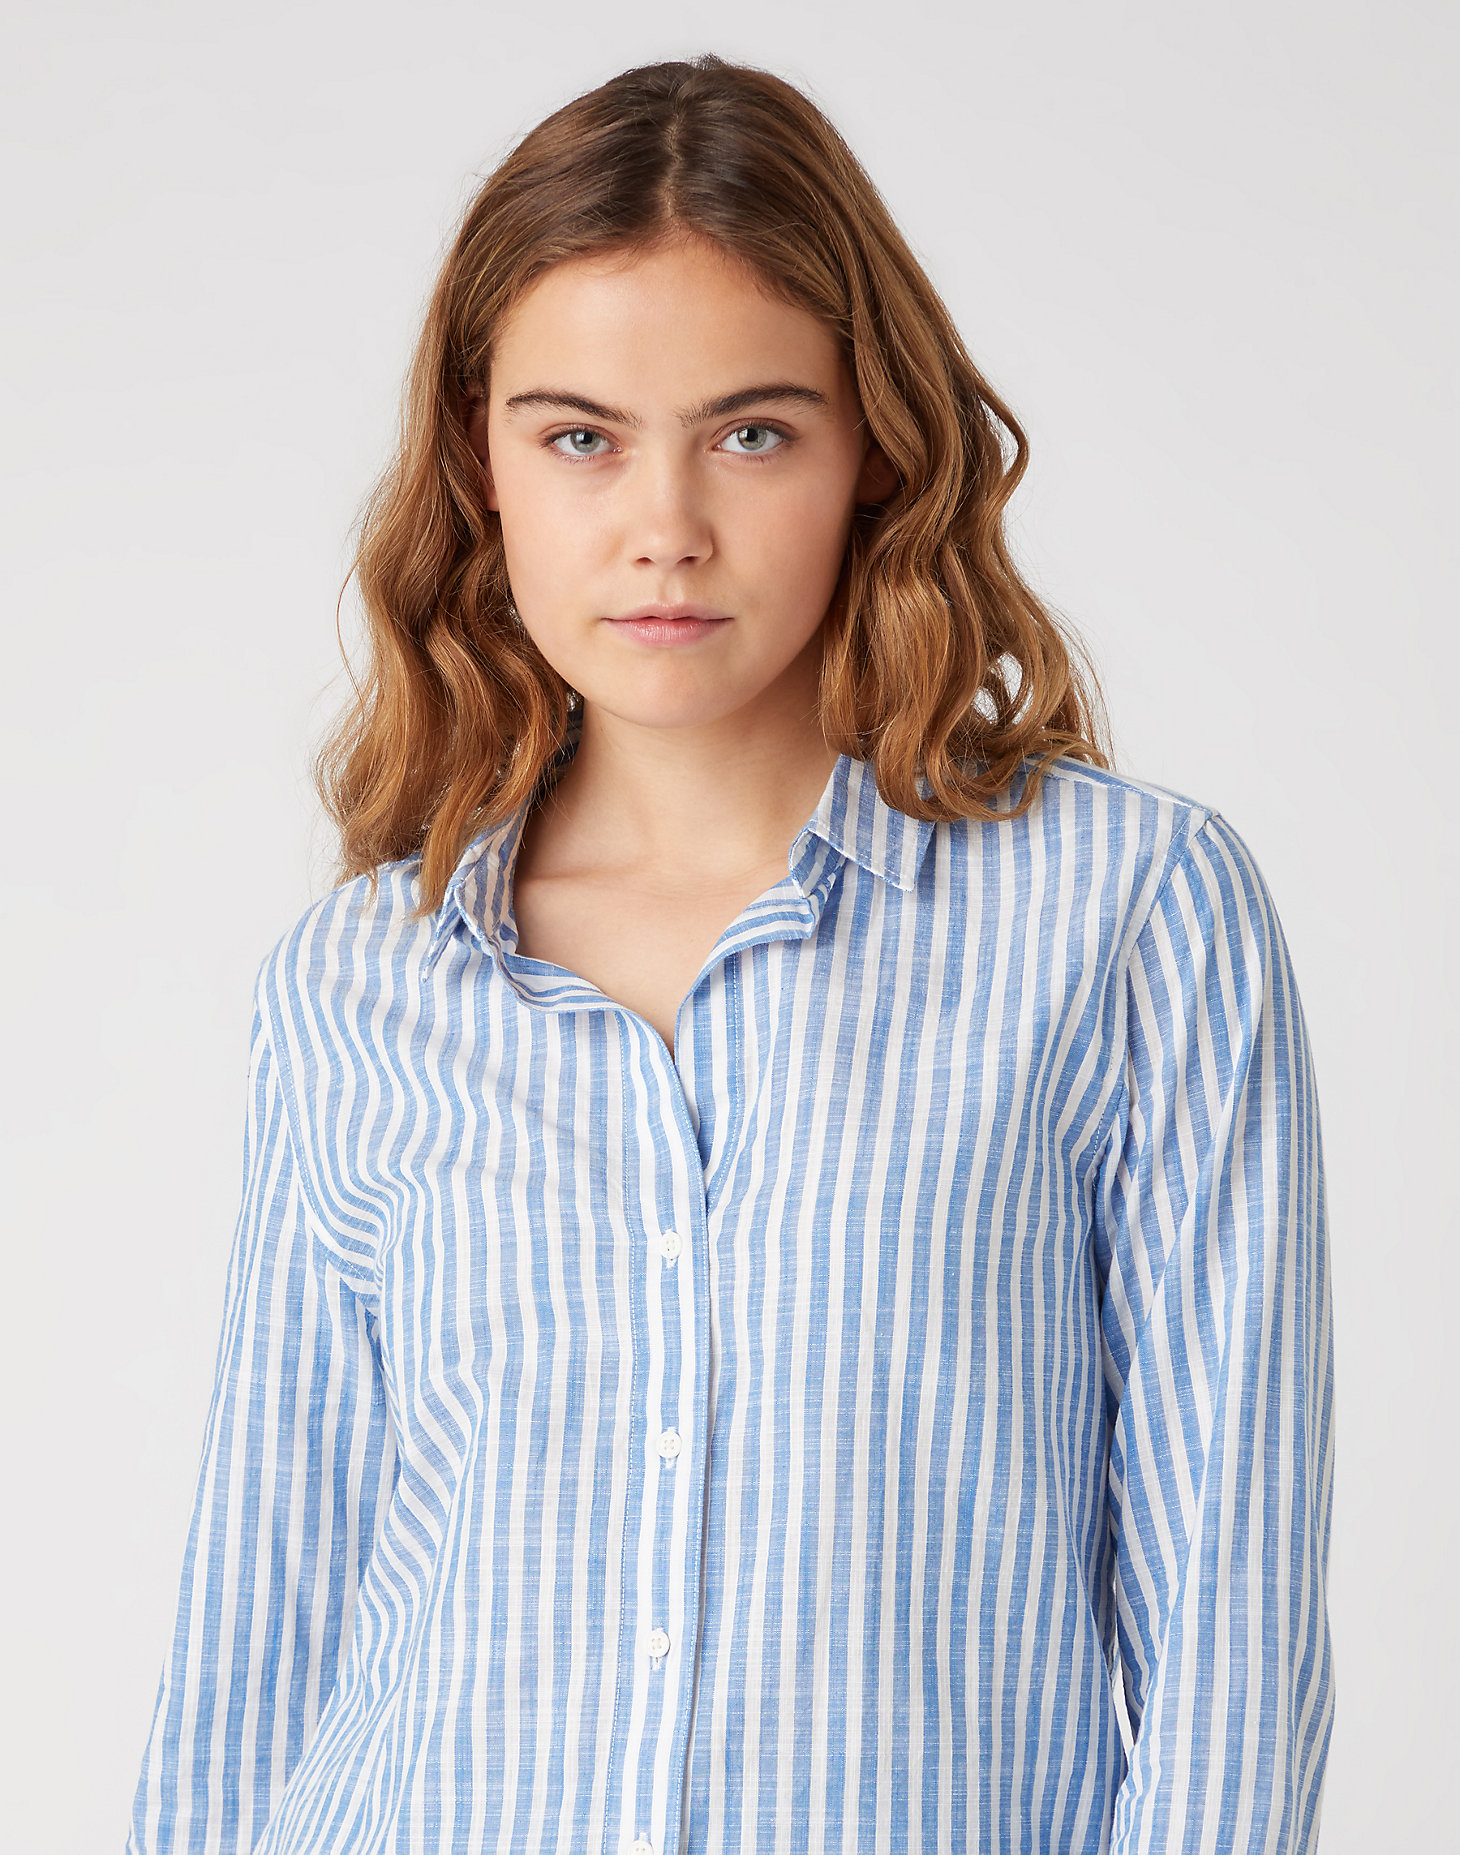 Stripe Shirt in Strong Blue